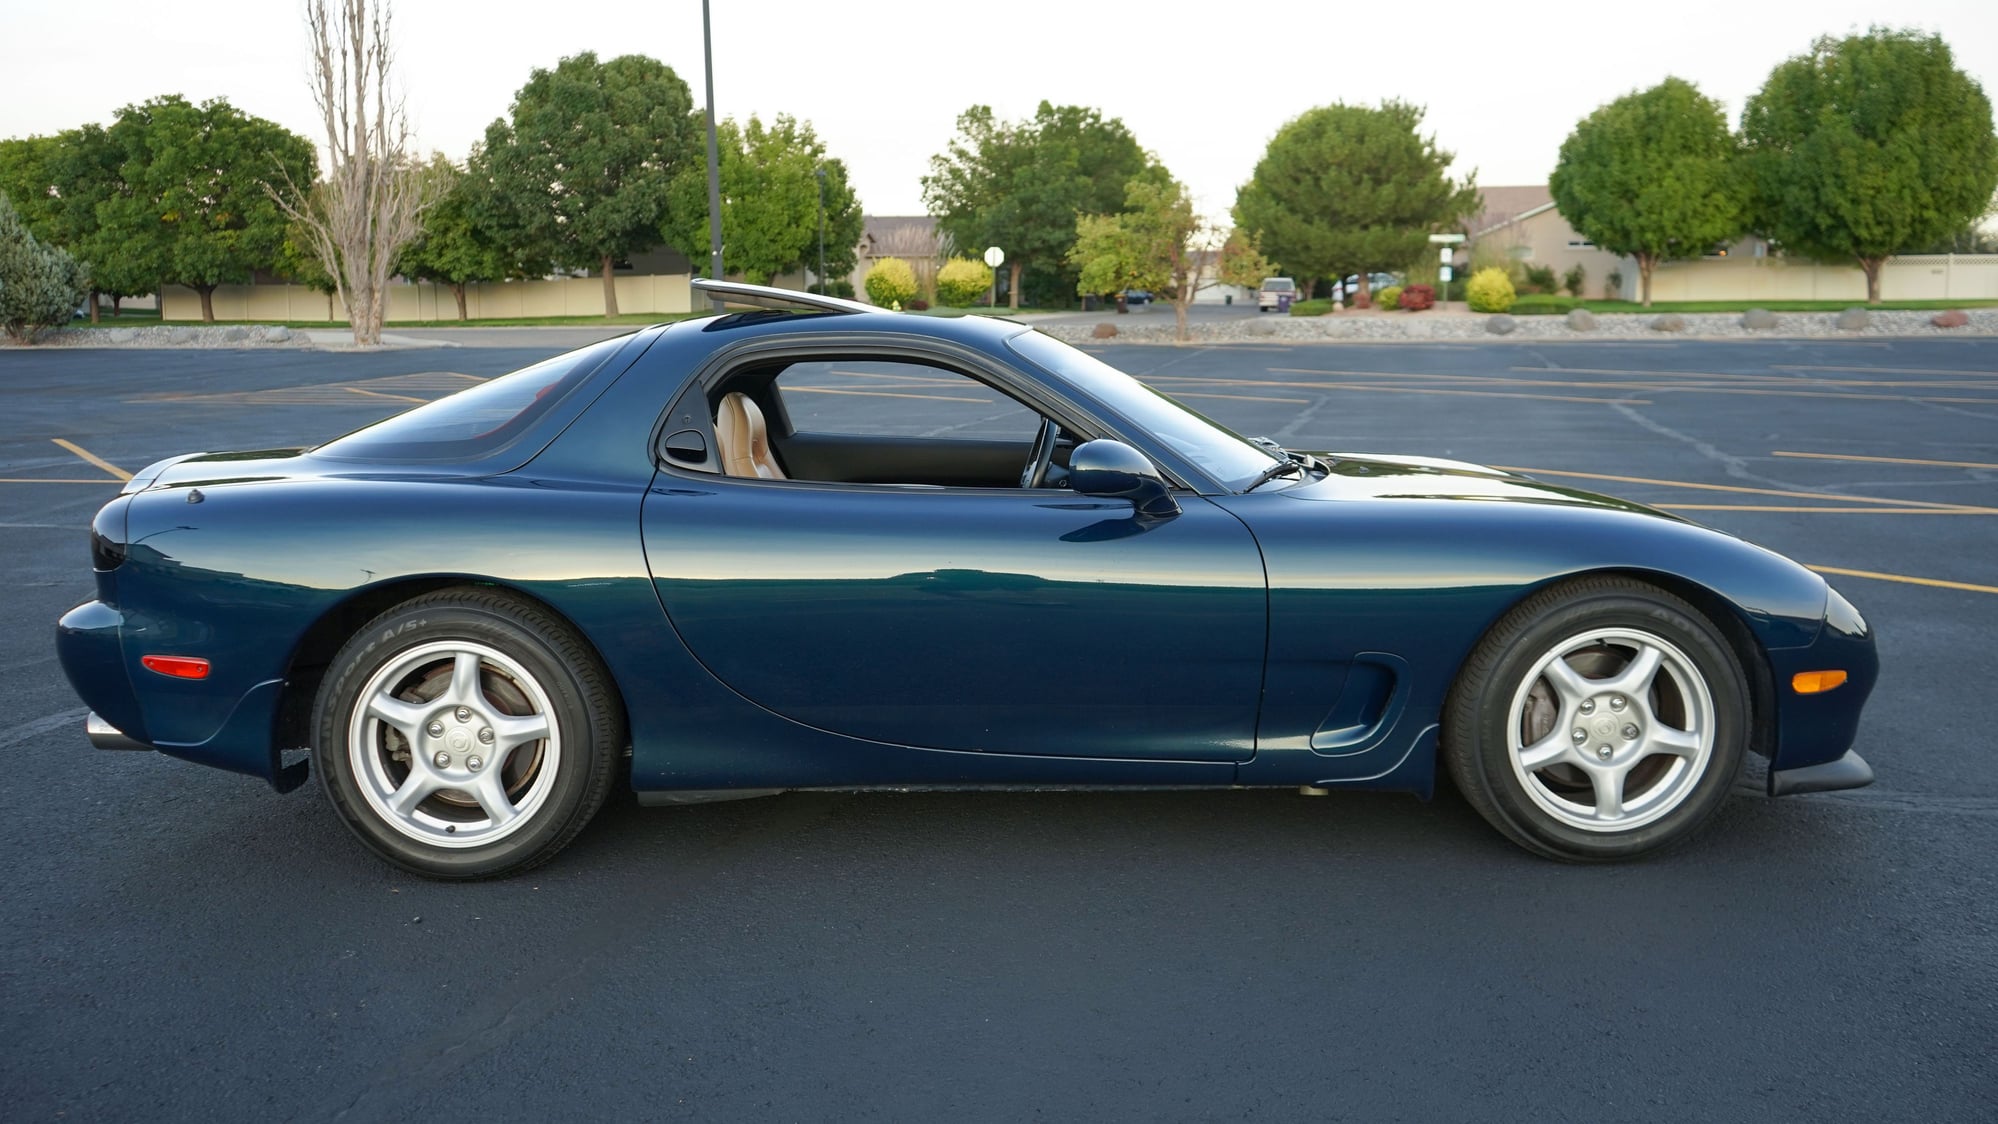 1994 Mazda RX-7 - 1994 Mazda RX-7 - Used - VIN JM1FD3334R030276 - 63,500 Miles - 2WD - Manual - Coupe - Blue - Grand Junction, CO 81507, United States